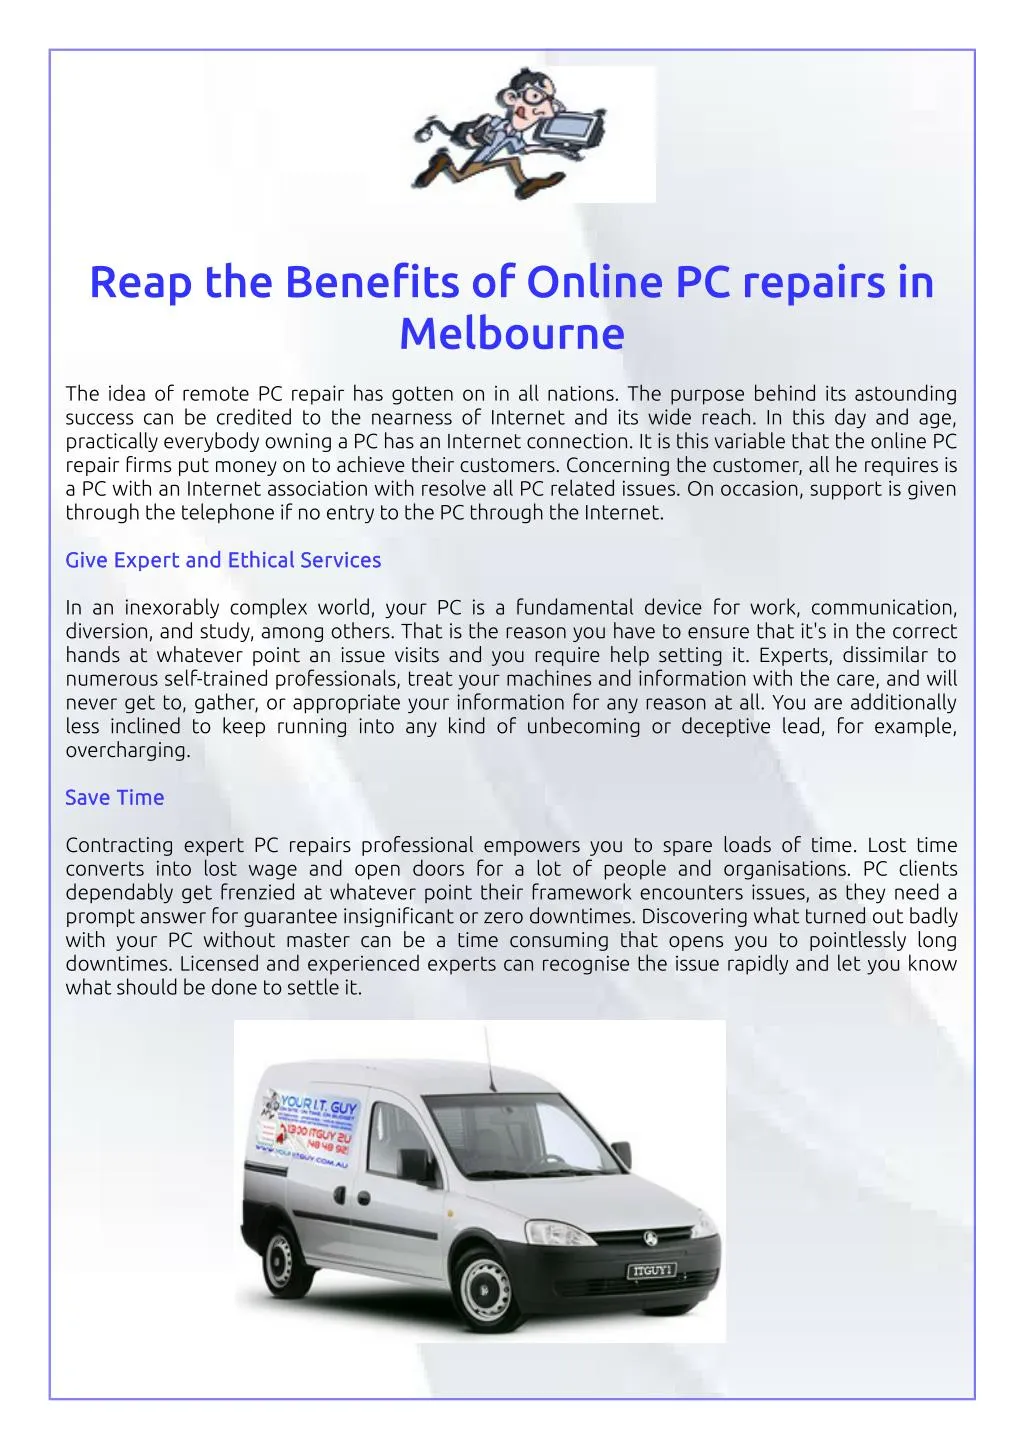 reap the benefits of online pc repairs